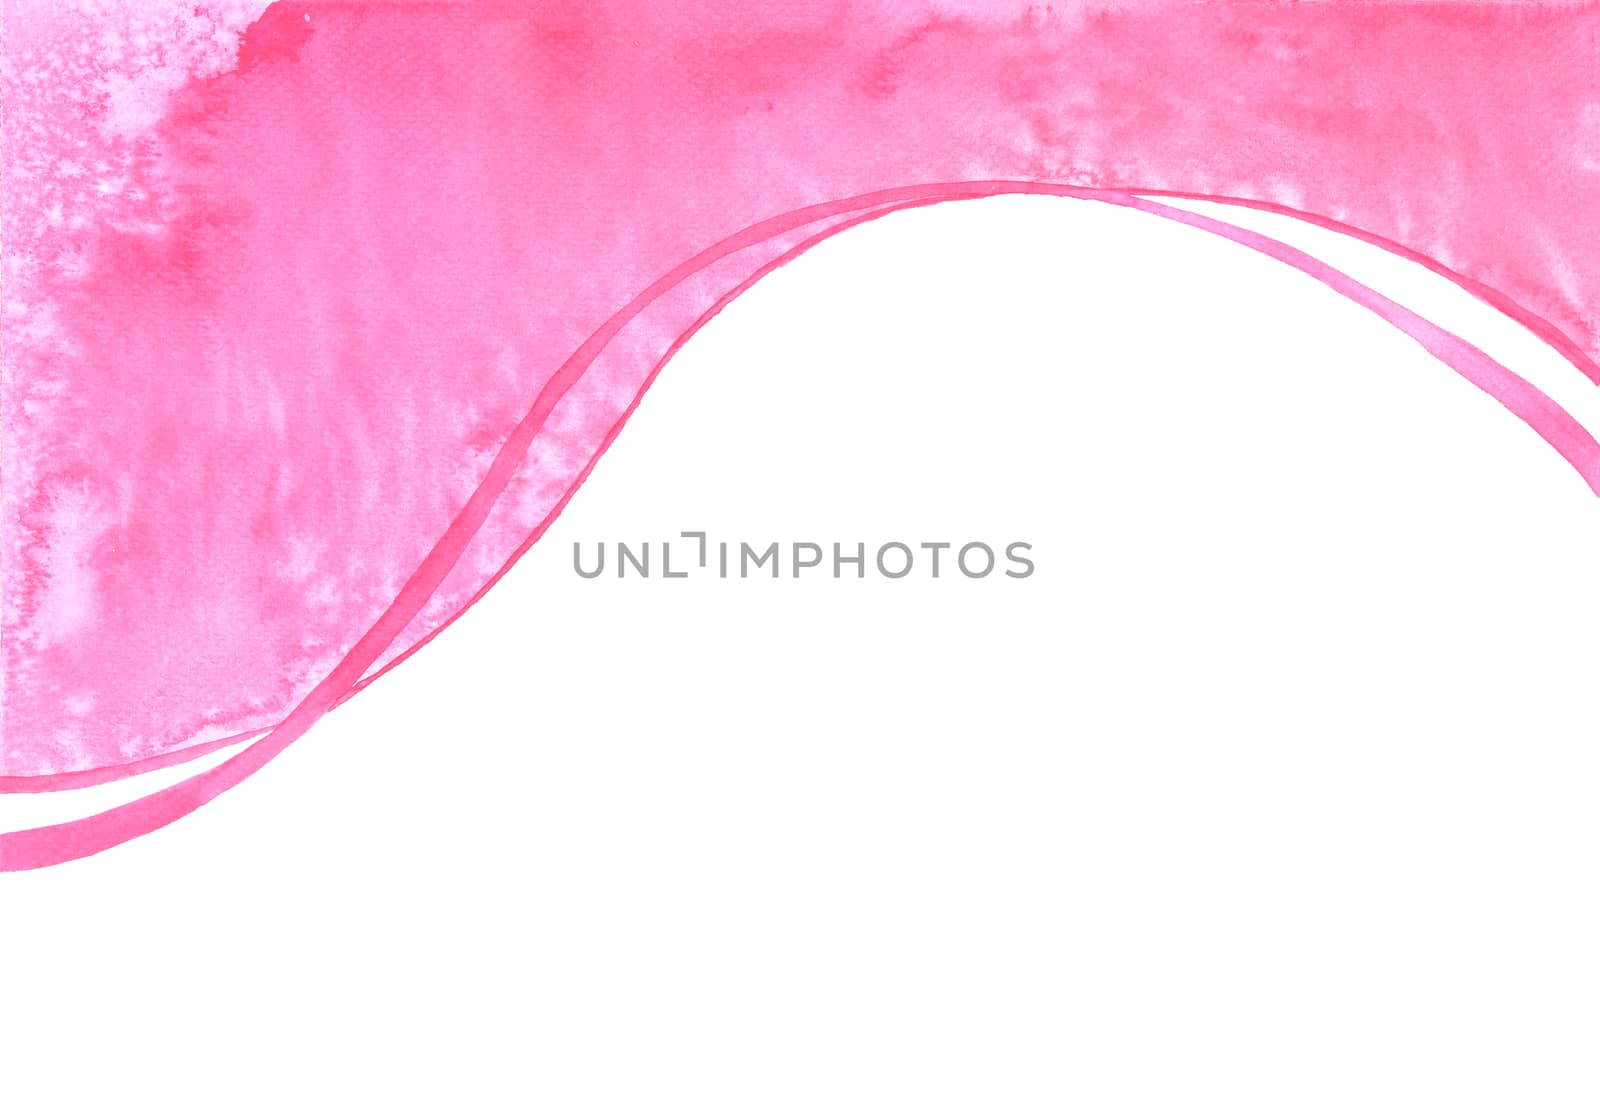 A smooth pink curve like a ribbon, Hand-painted abstract watercolor on white background.